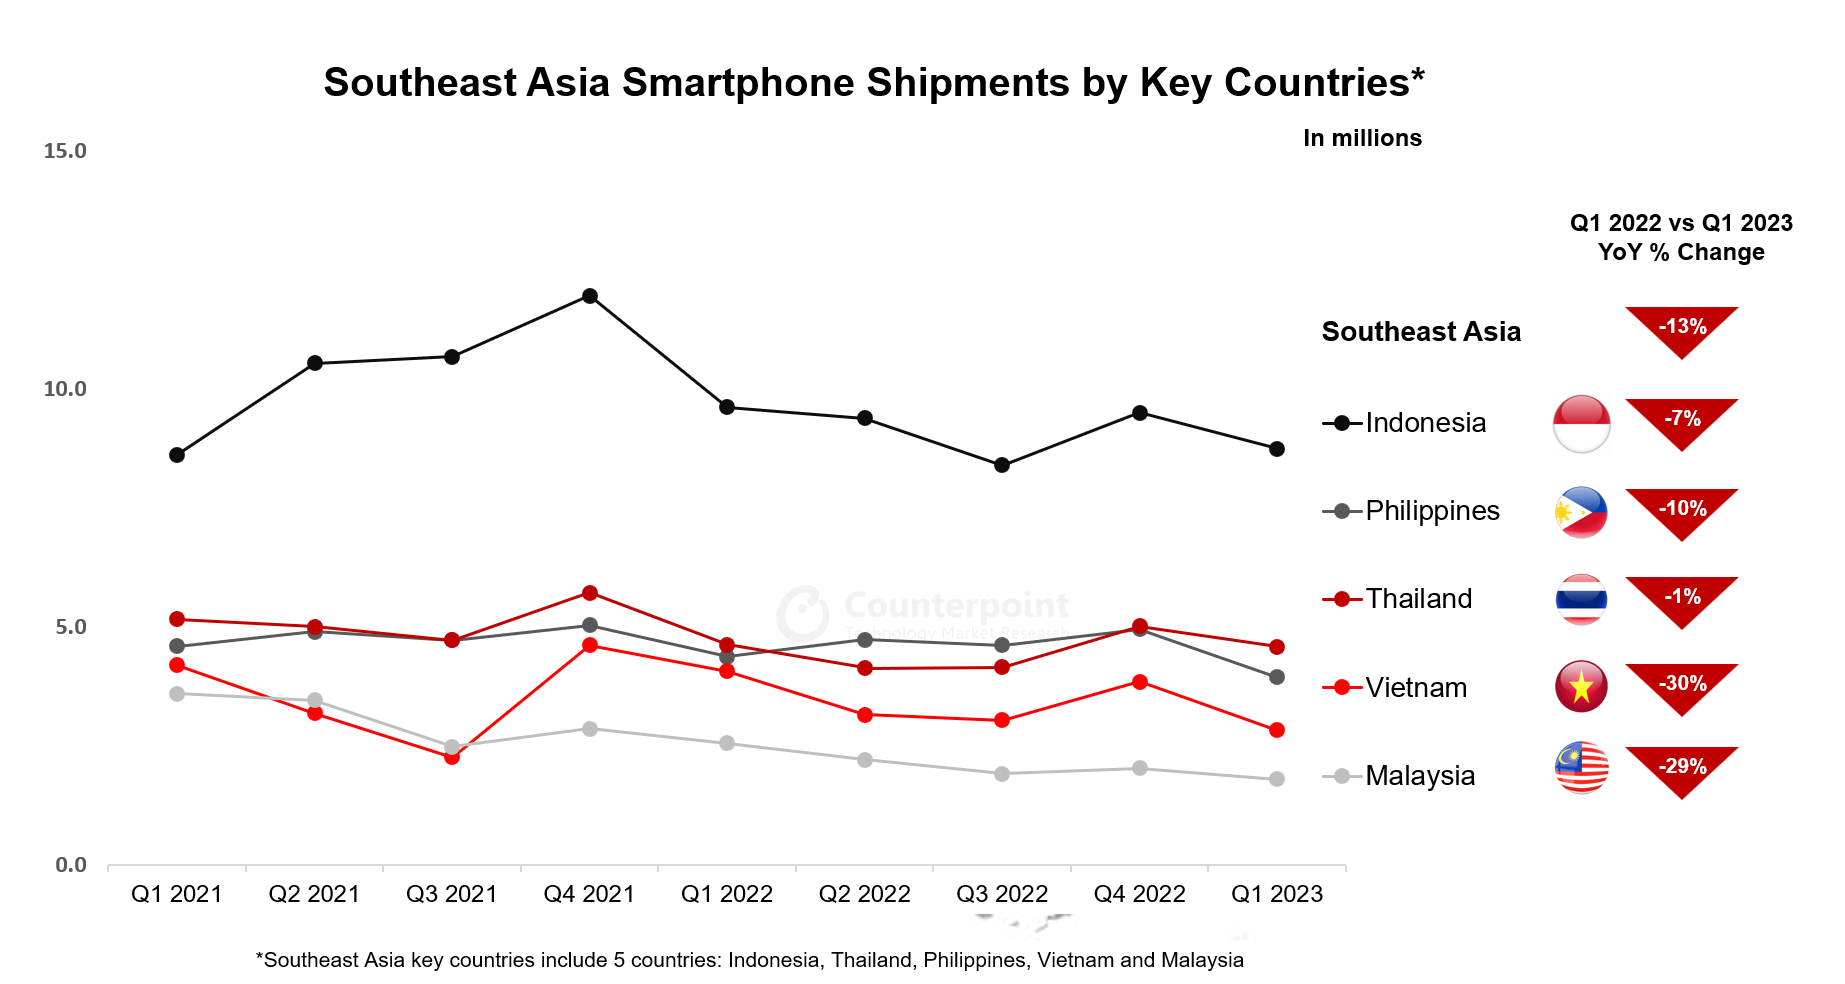 Southeast Asia Smartphone Shipments by Major Countries